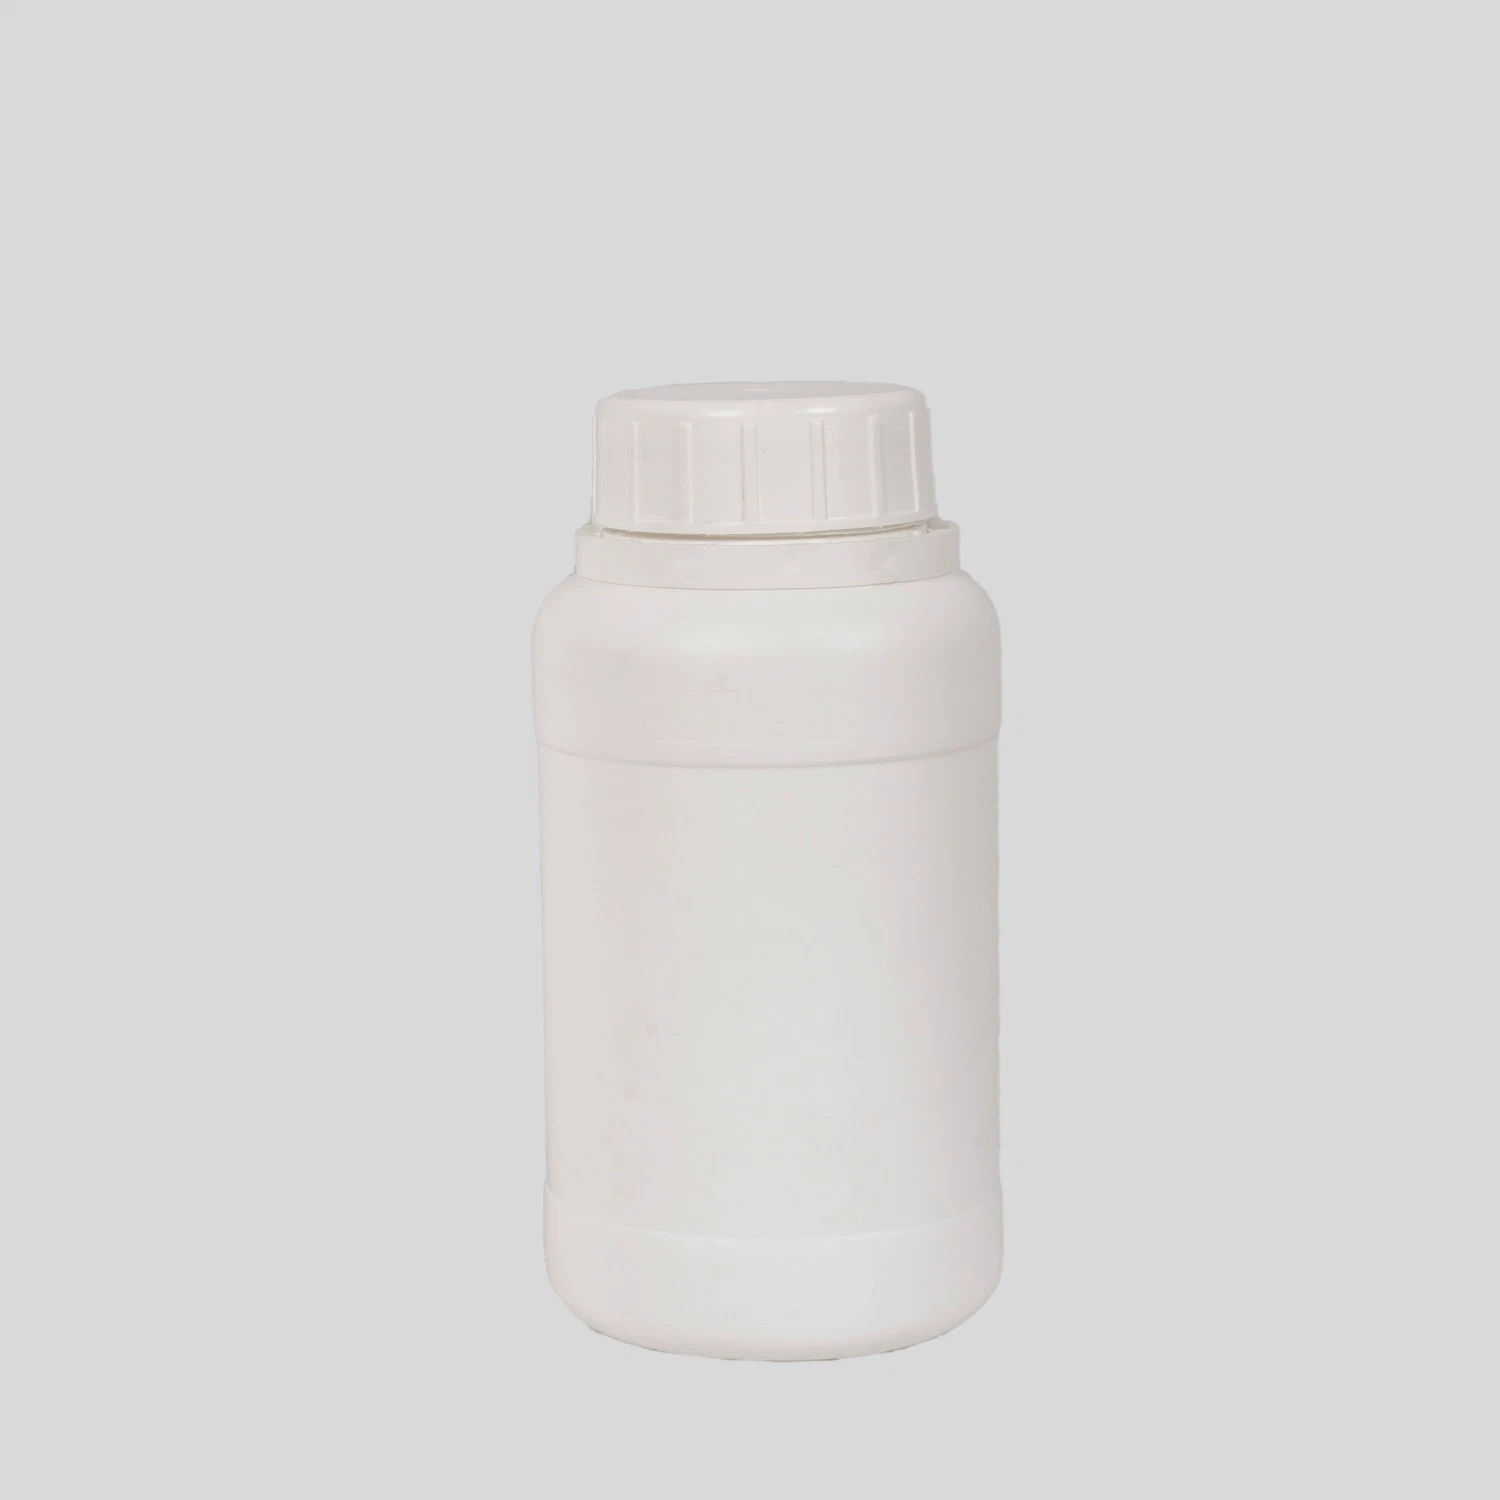 Non-Toxic Phthalate Free Plasticizer Triethyl Citrate Tec CAS 77-93-0 for PVC, Rubber, Toys, Cosmetics and Medical Products